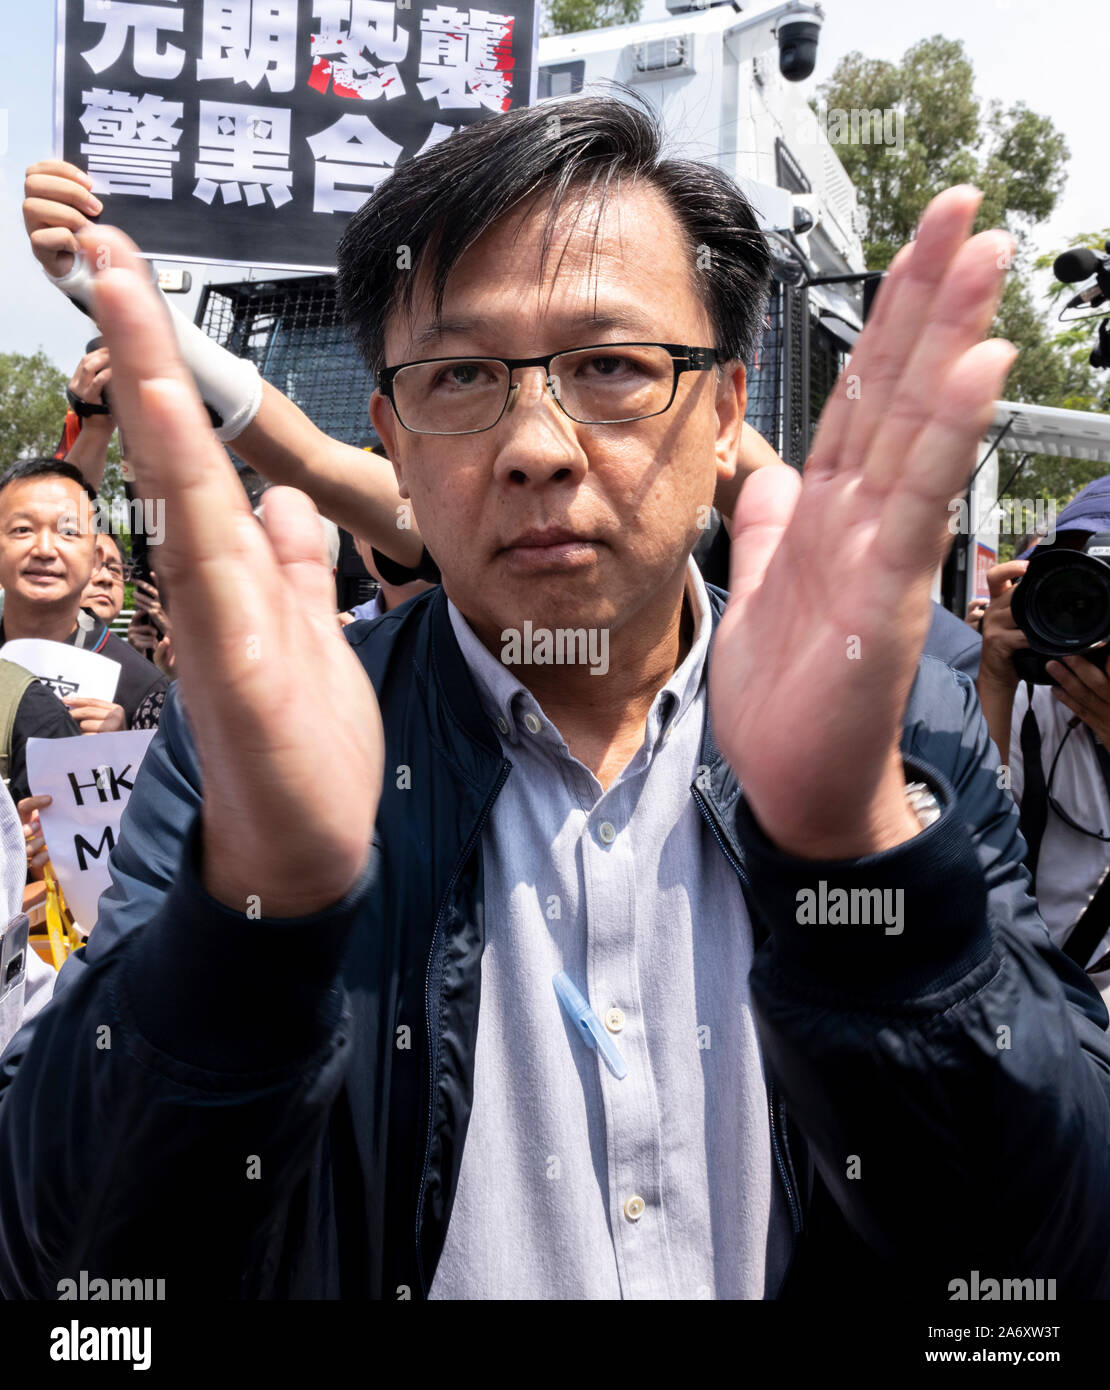 Pro-Beijing lawmaker Junius Ho Kwan-yiu has been stripped of an honorary law degree by his alma mater, Anglia Ruskin University Cambridge, for shaking Stock Photo